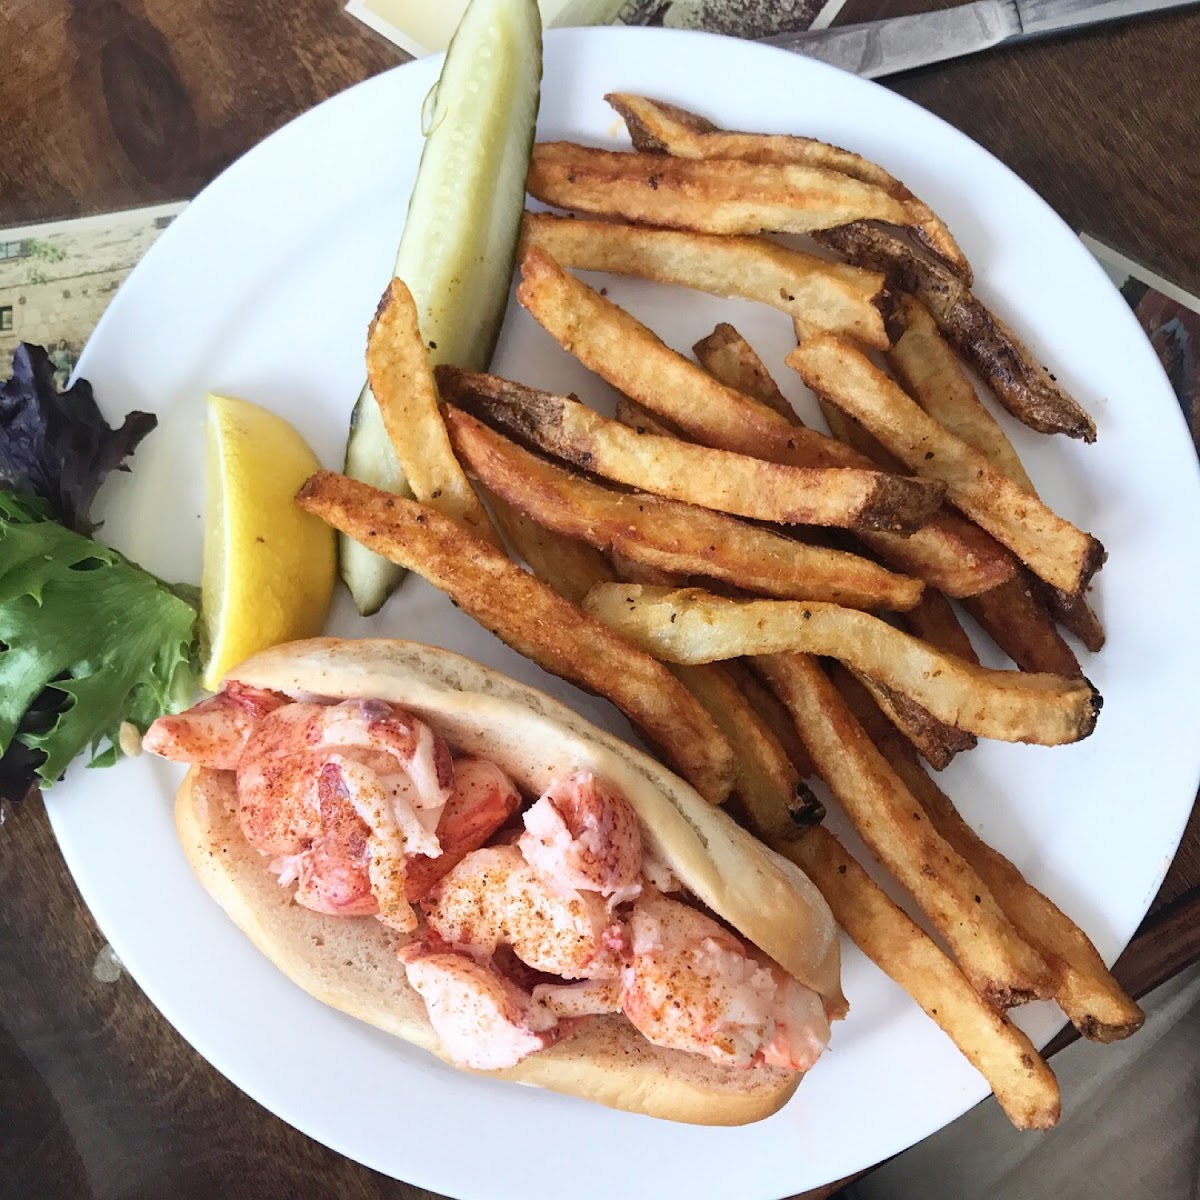 Lobster roll with pub fries (all GF!)